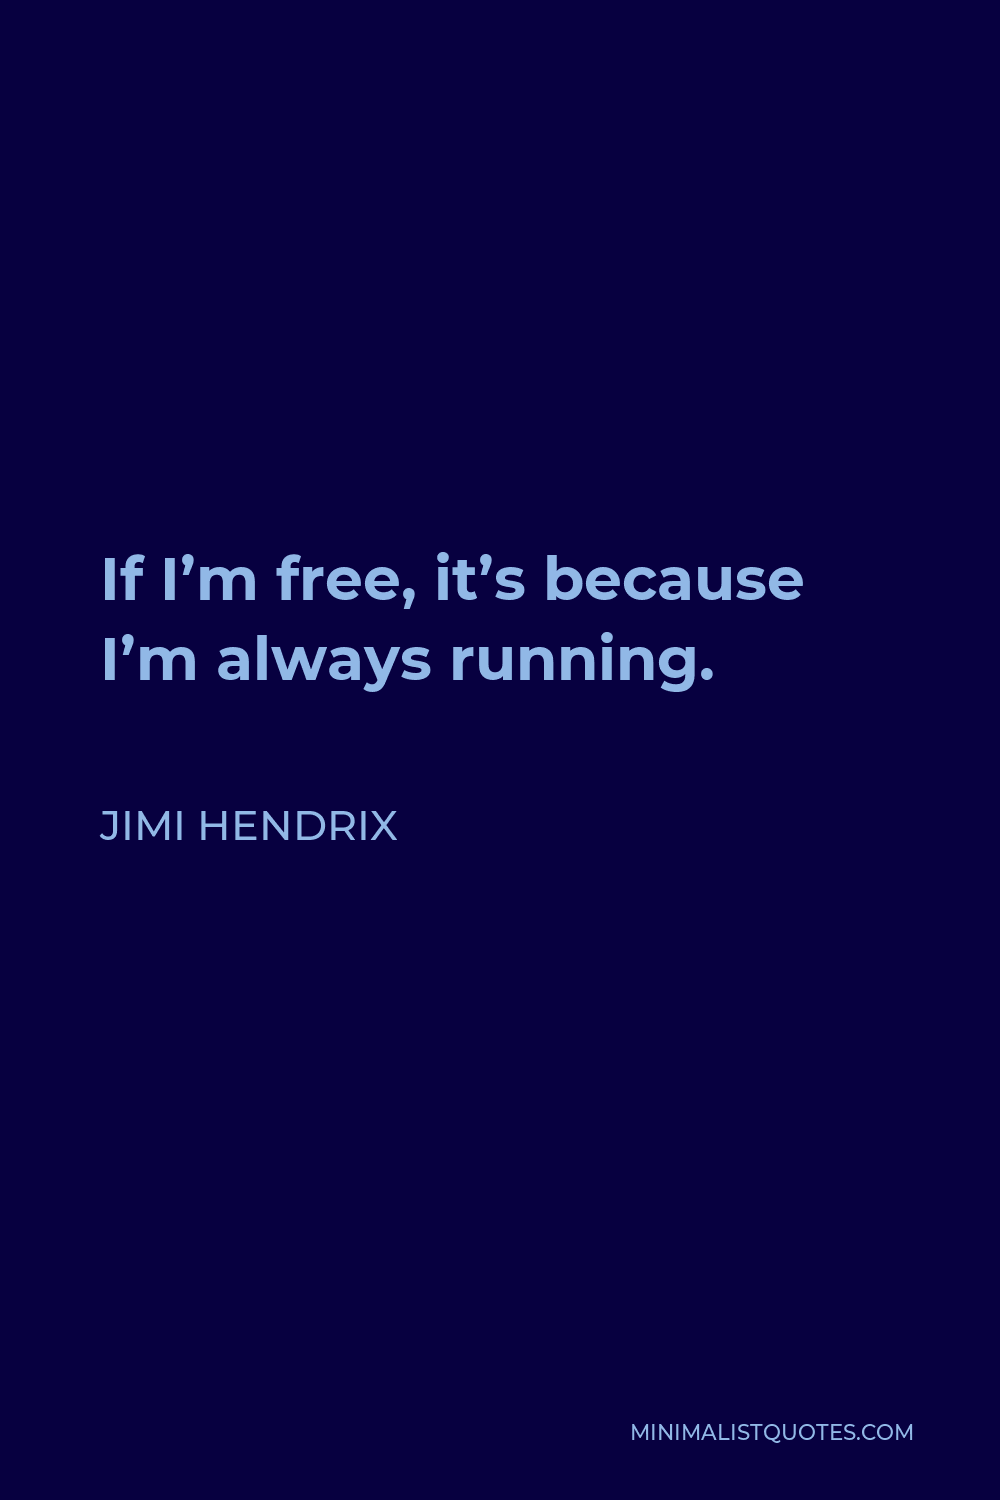 Jimi Hendrix Quote - If I’m free, it’s because I’m always running.